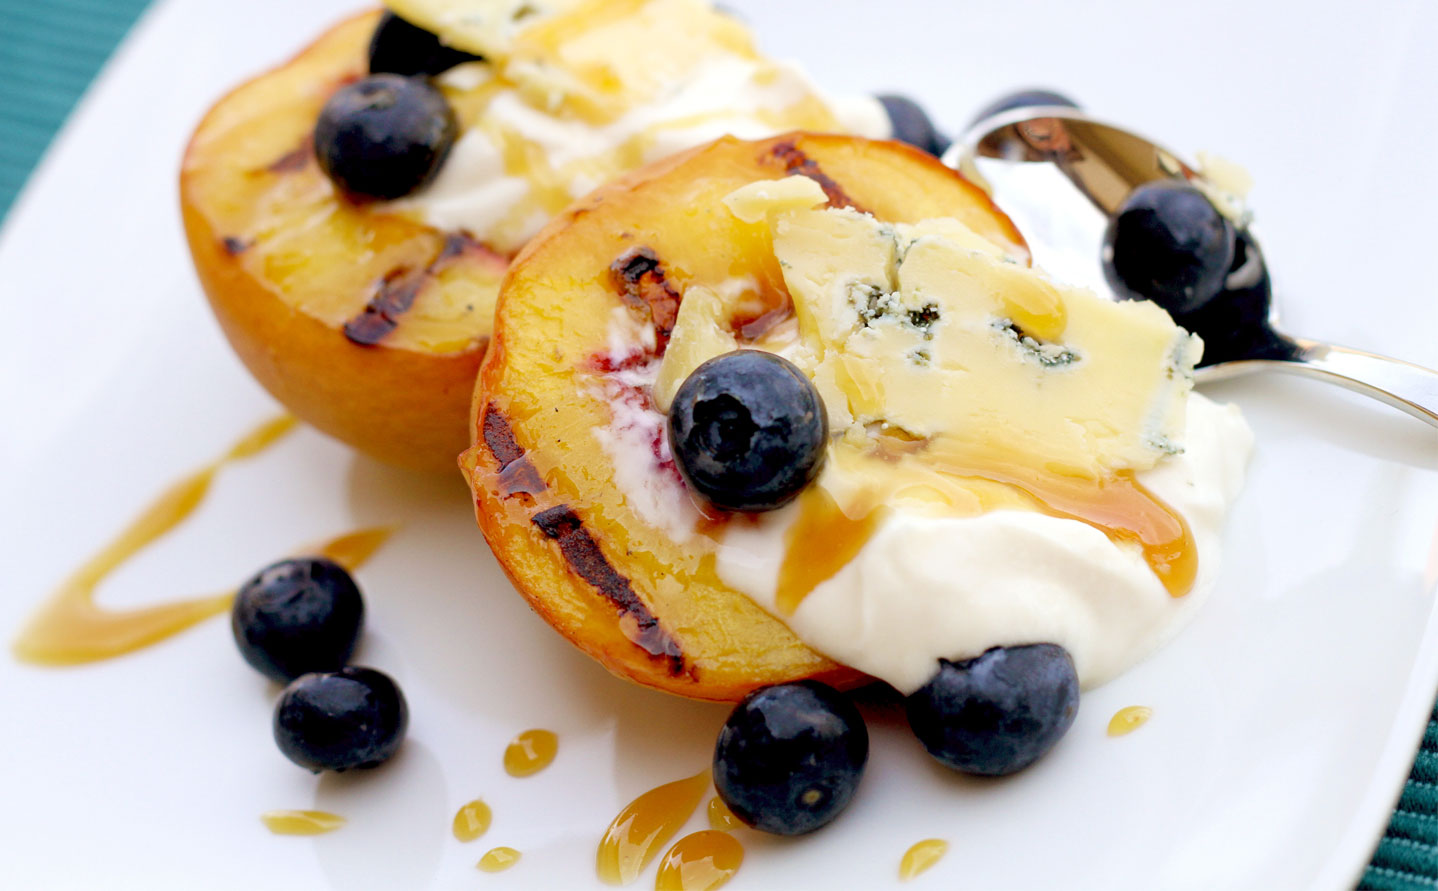 Caveman Blue Cheese on grilled peaches with blueberries and honey